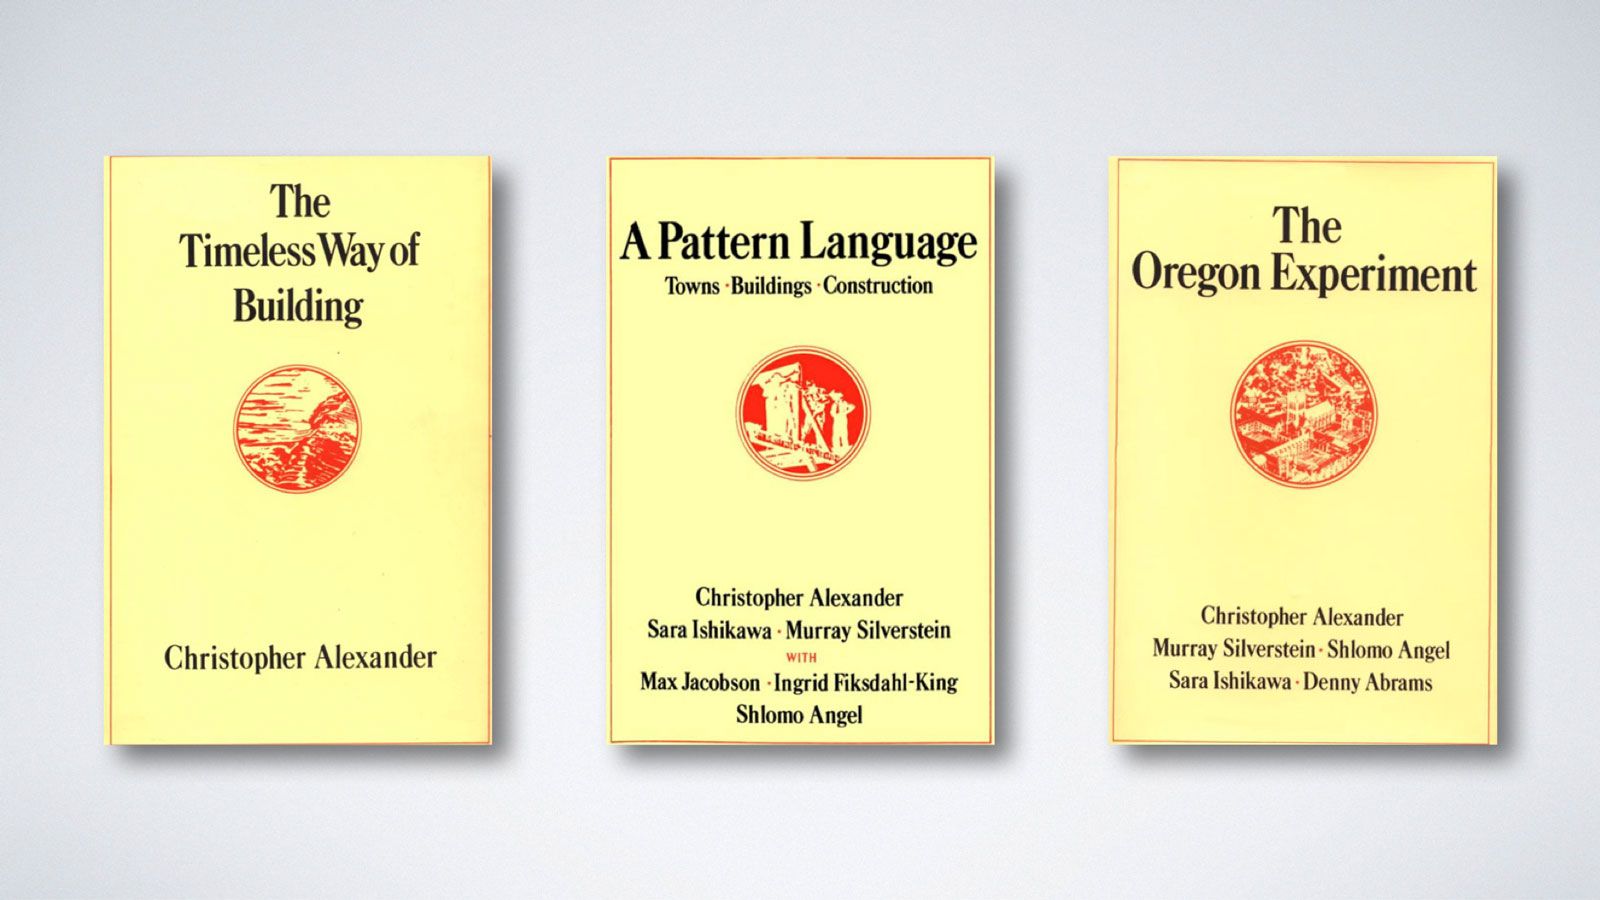 Christopher Alexander’s series: The Timeless Way of Building, A Pattern Language & The Oregon Experiment